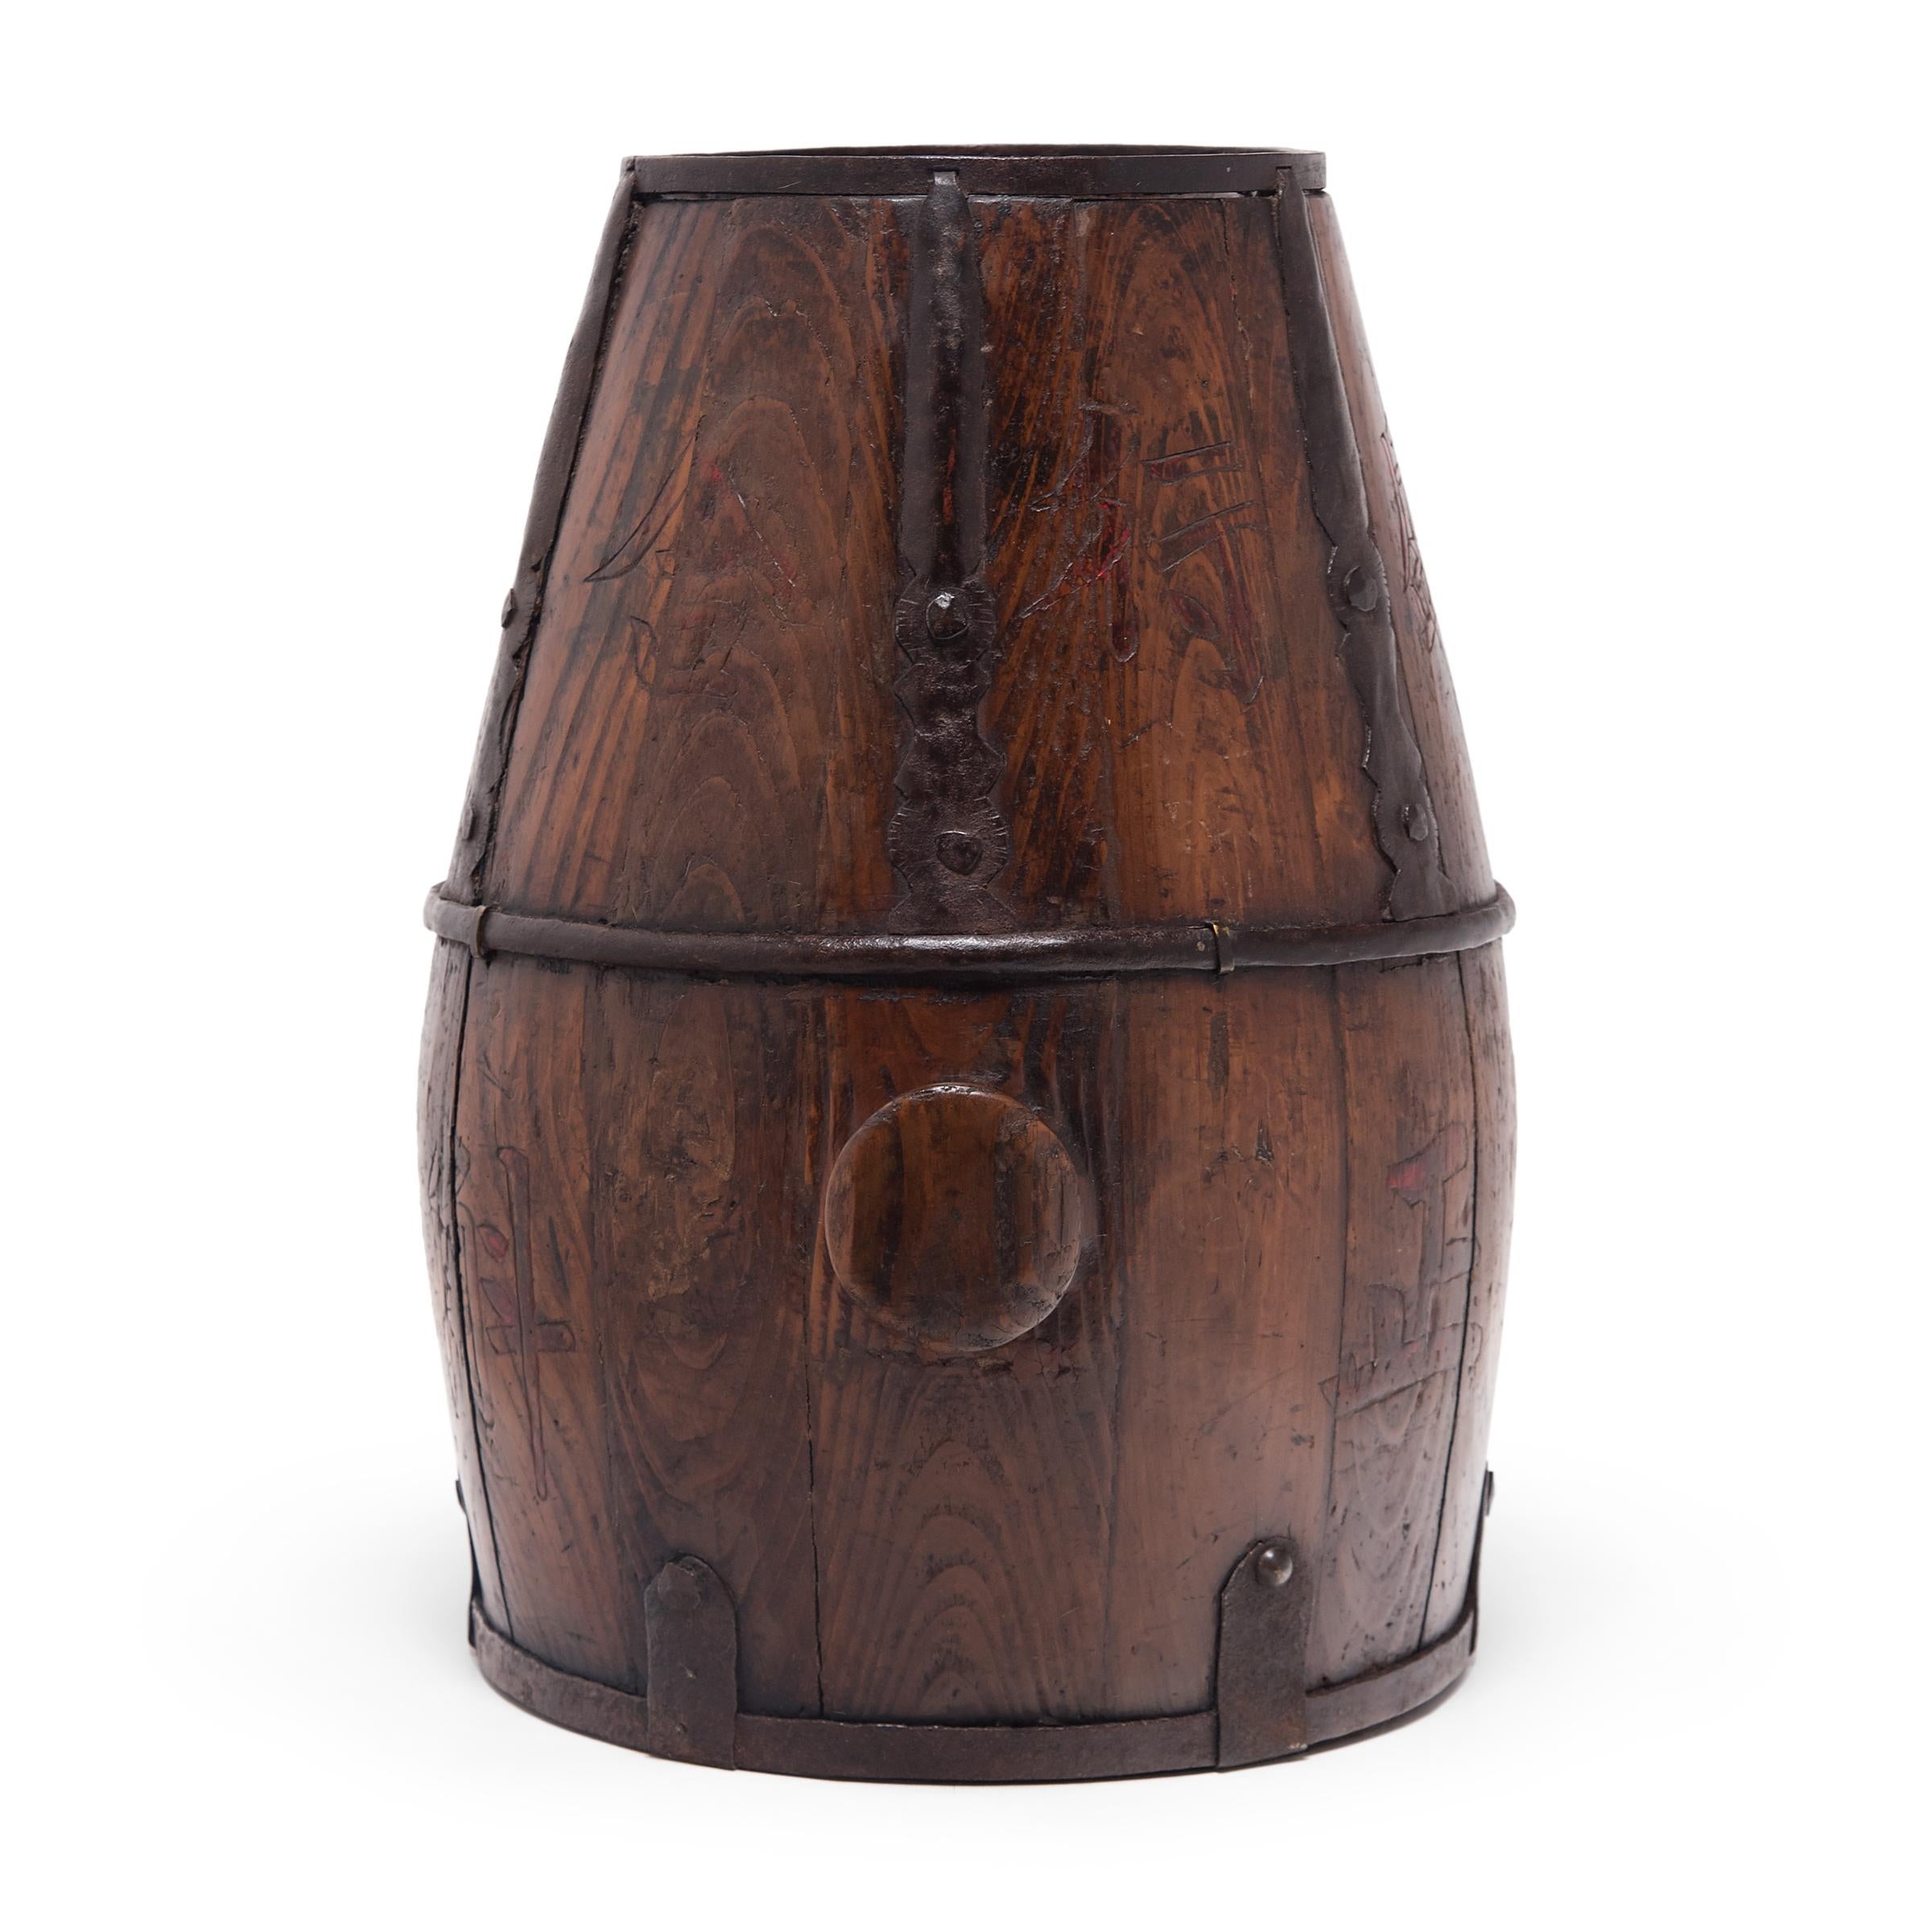 Rustic Chinese Barrel-Form Grain Container, c. 1900